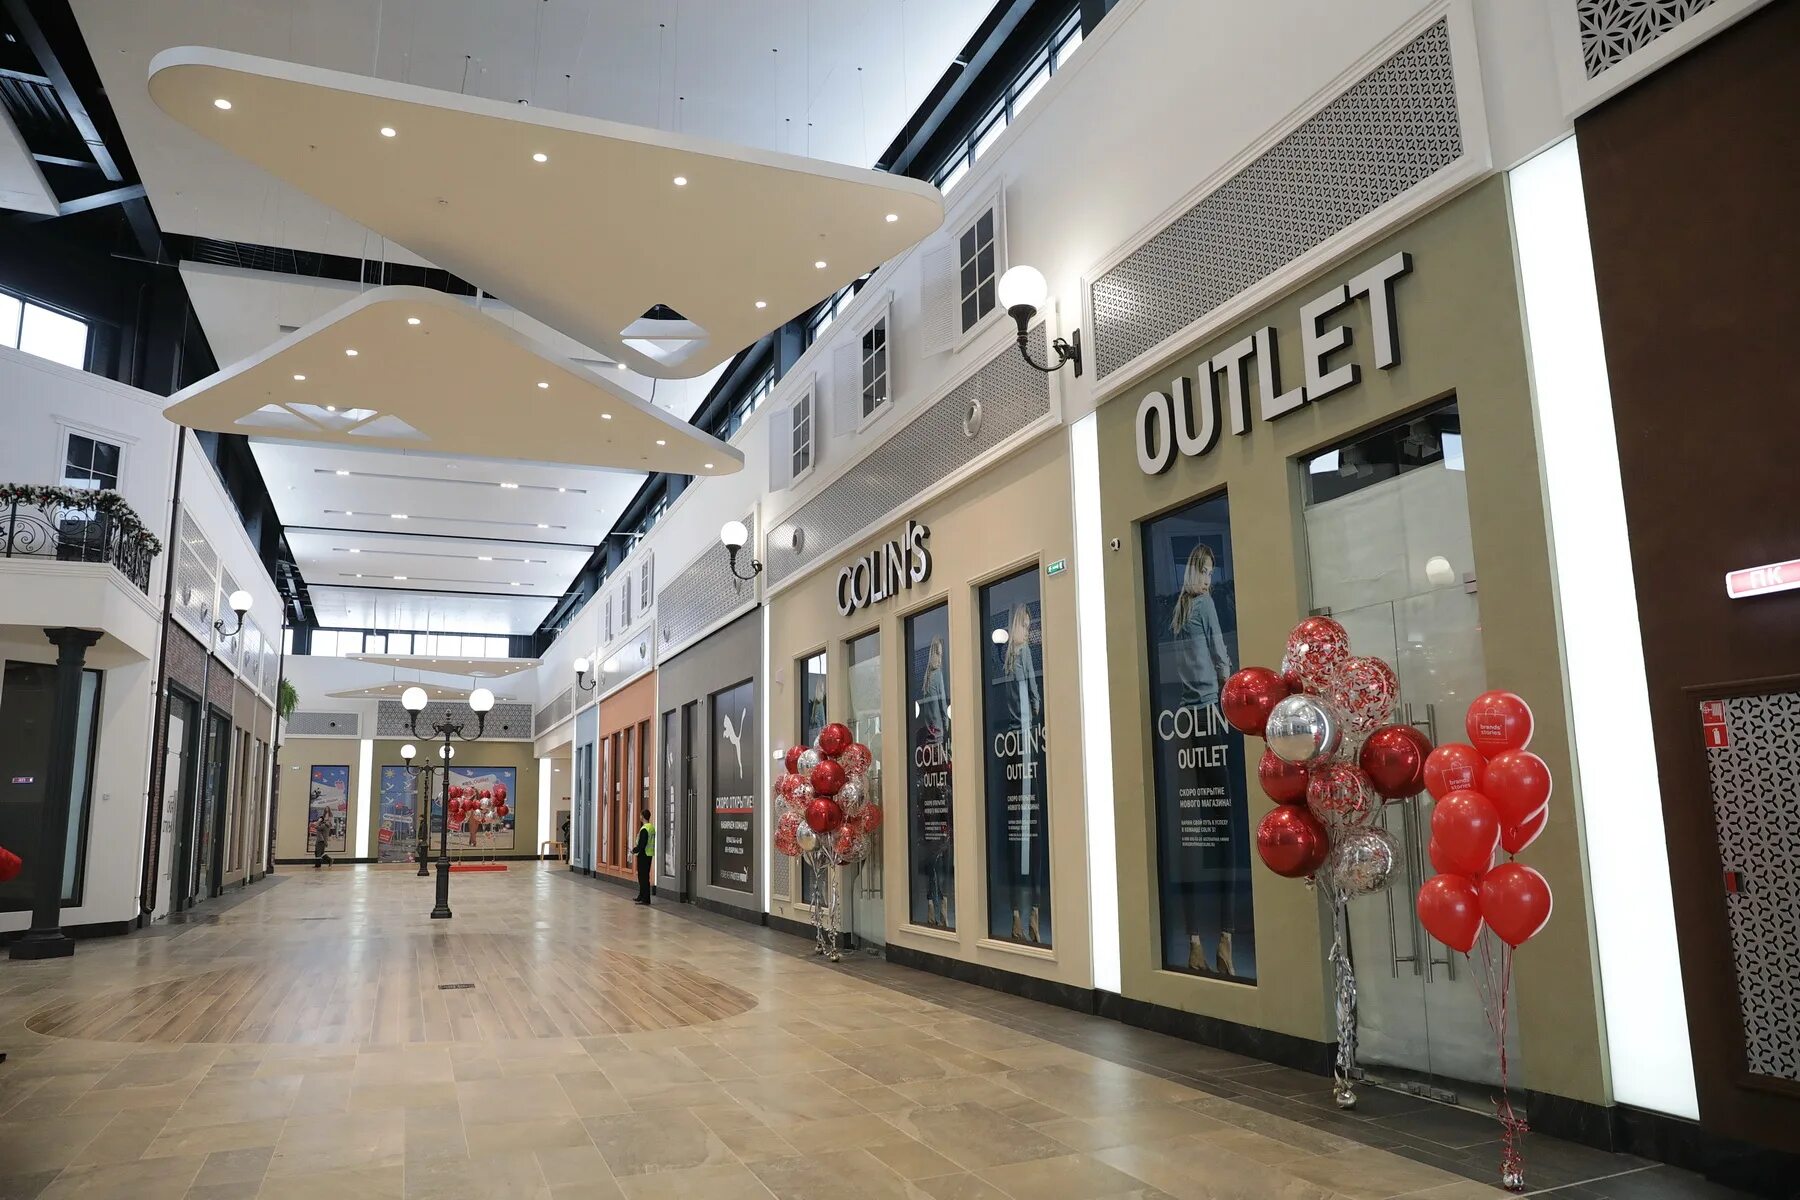 Brands outlet. Brands stories Outlet Екатеринбург. Бренд стори аутлет в Екатеринбурге. Аутлет в Солнечном Екатеринбург. ТЦ бренд стори Екатеринбург.